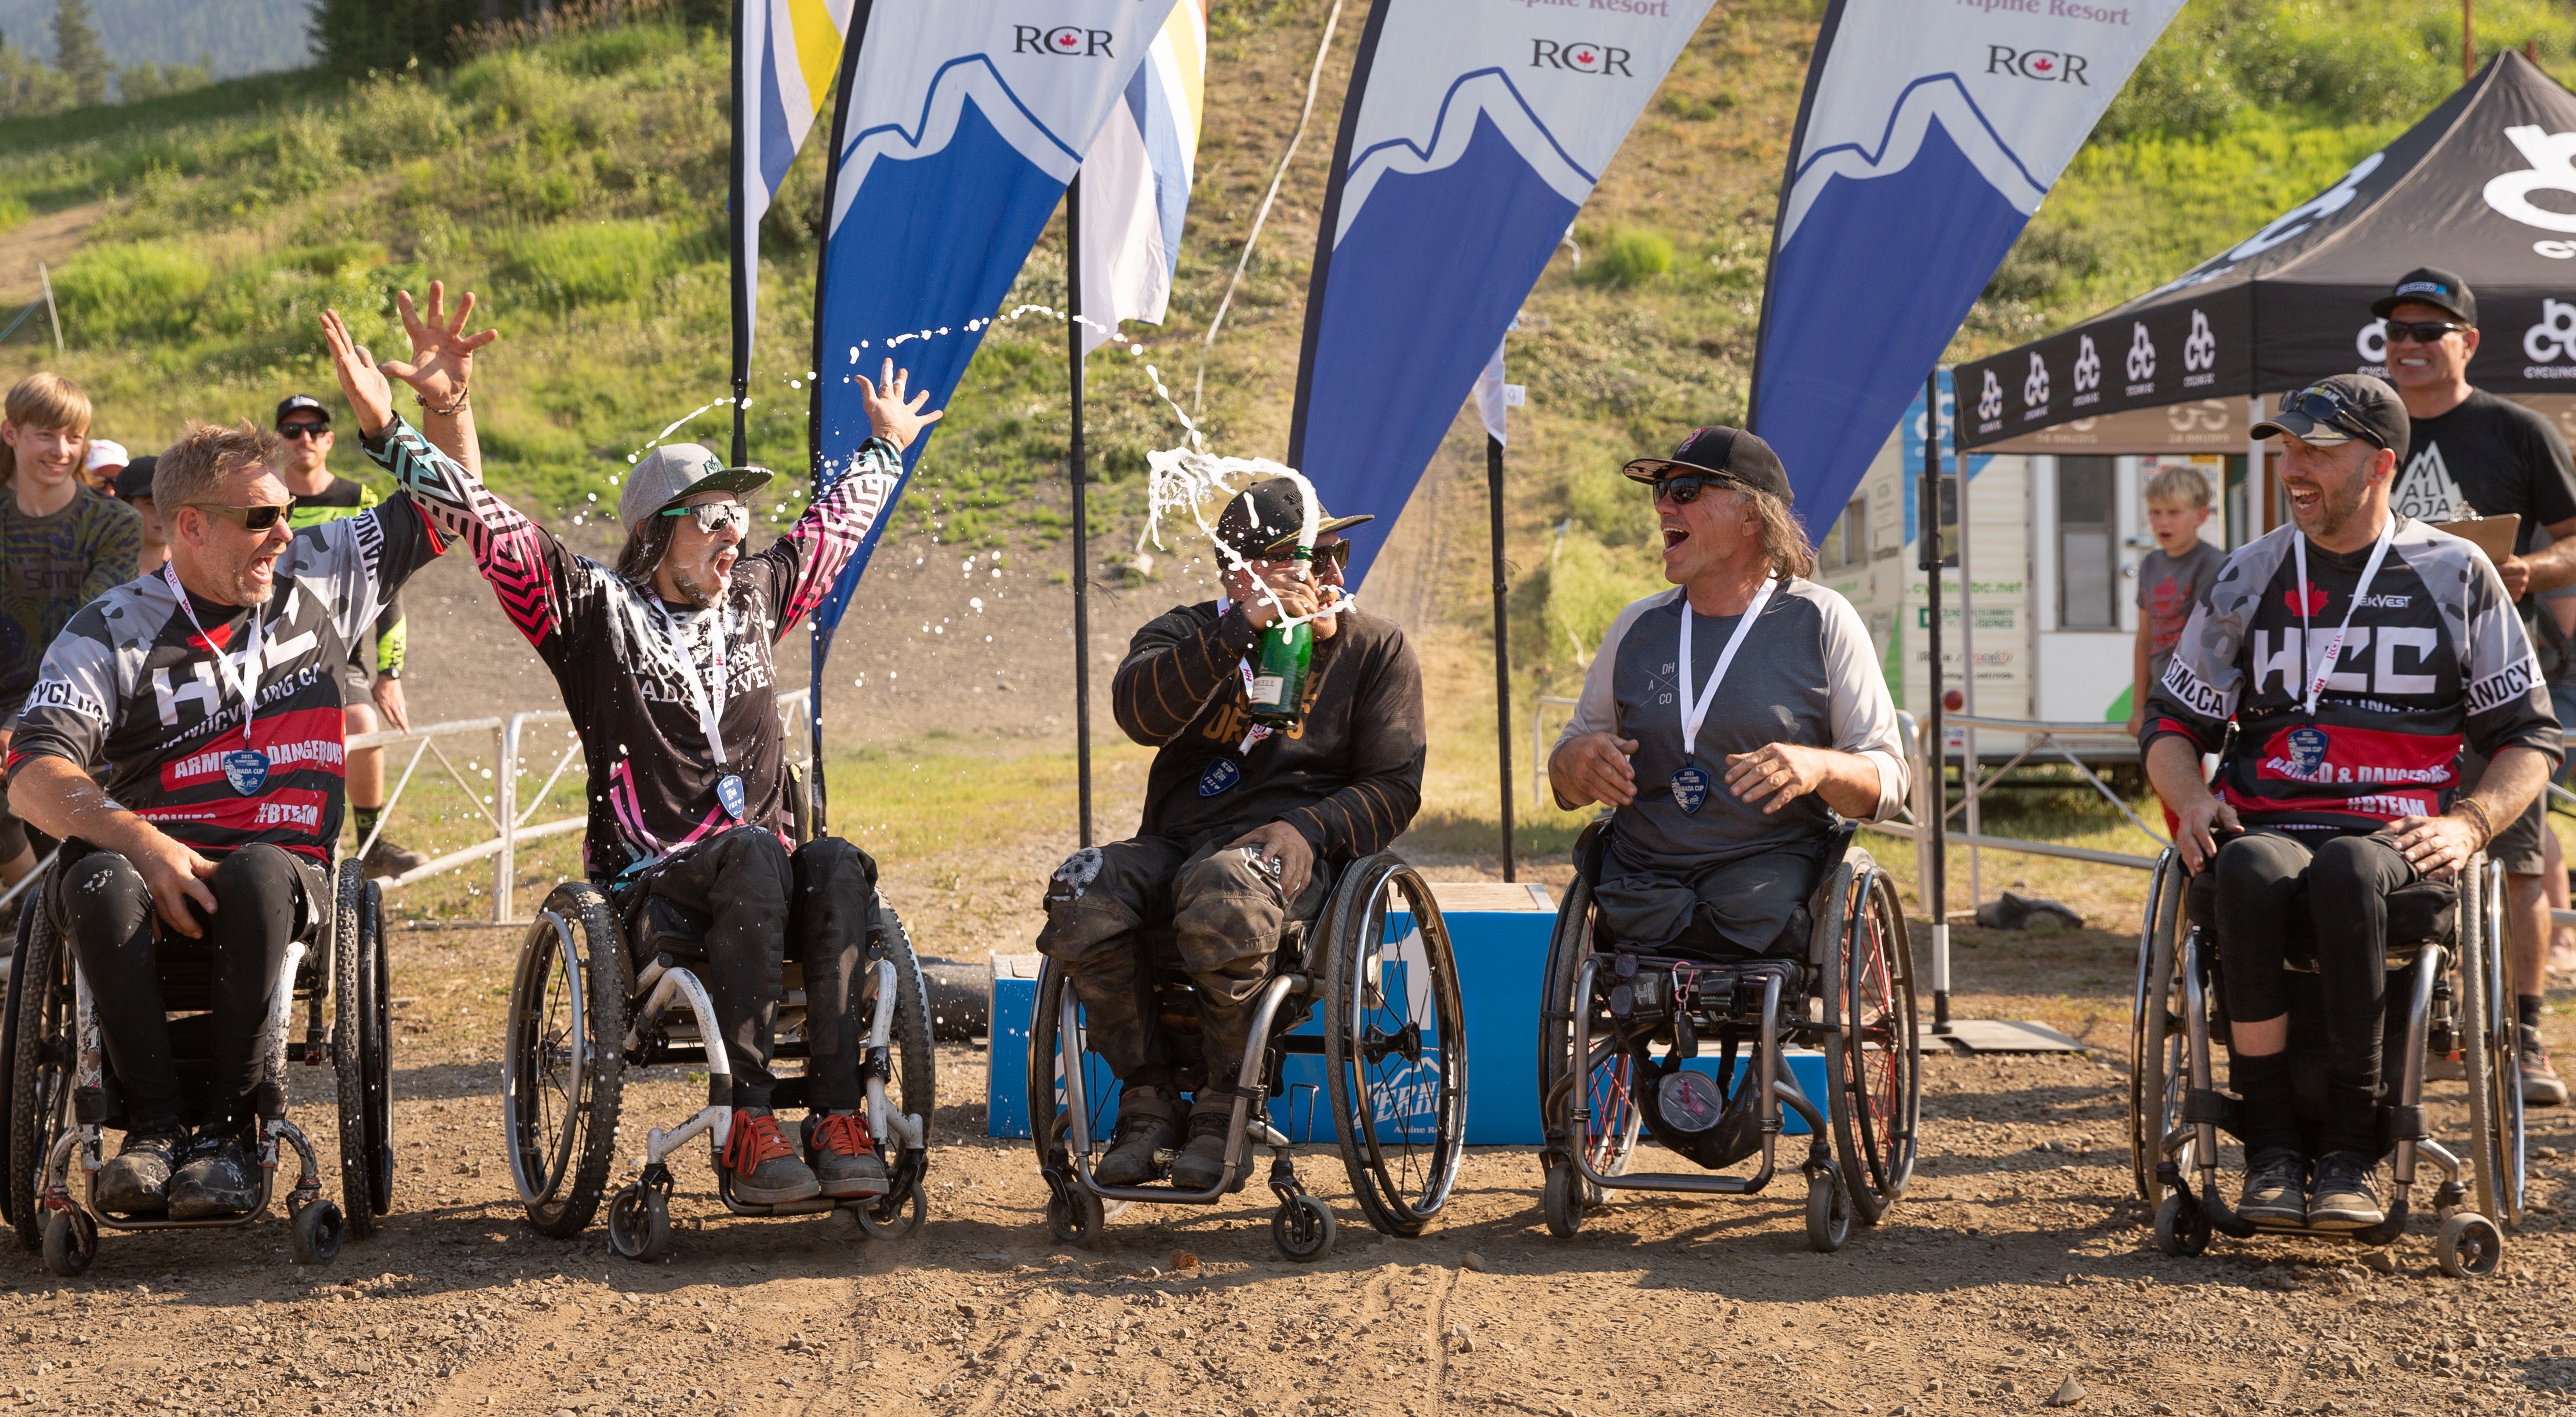 Five individuals are seated in wheelchairs in front of a blue podium and three flags that say 